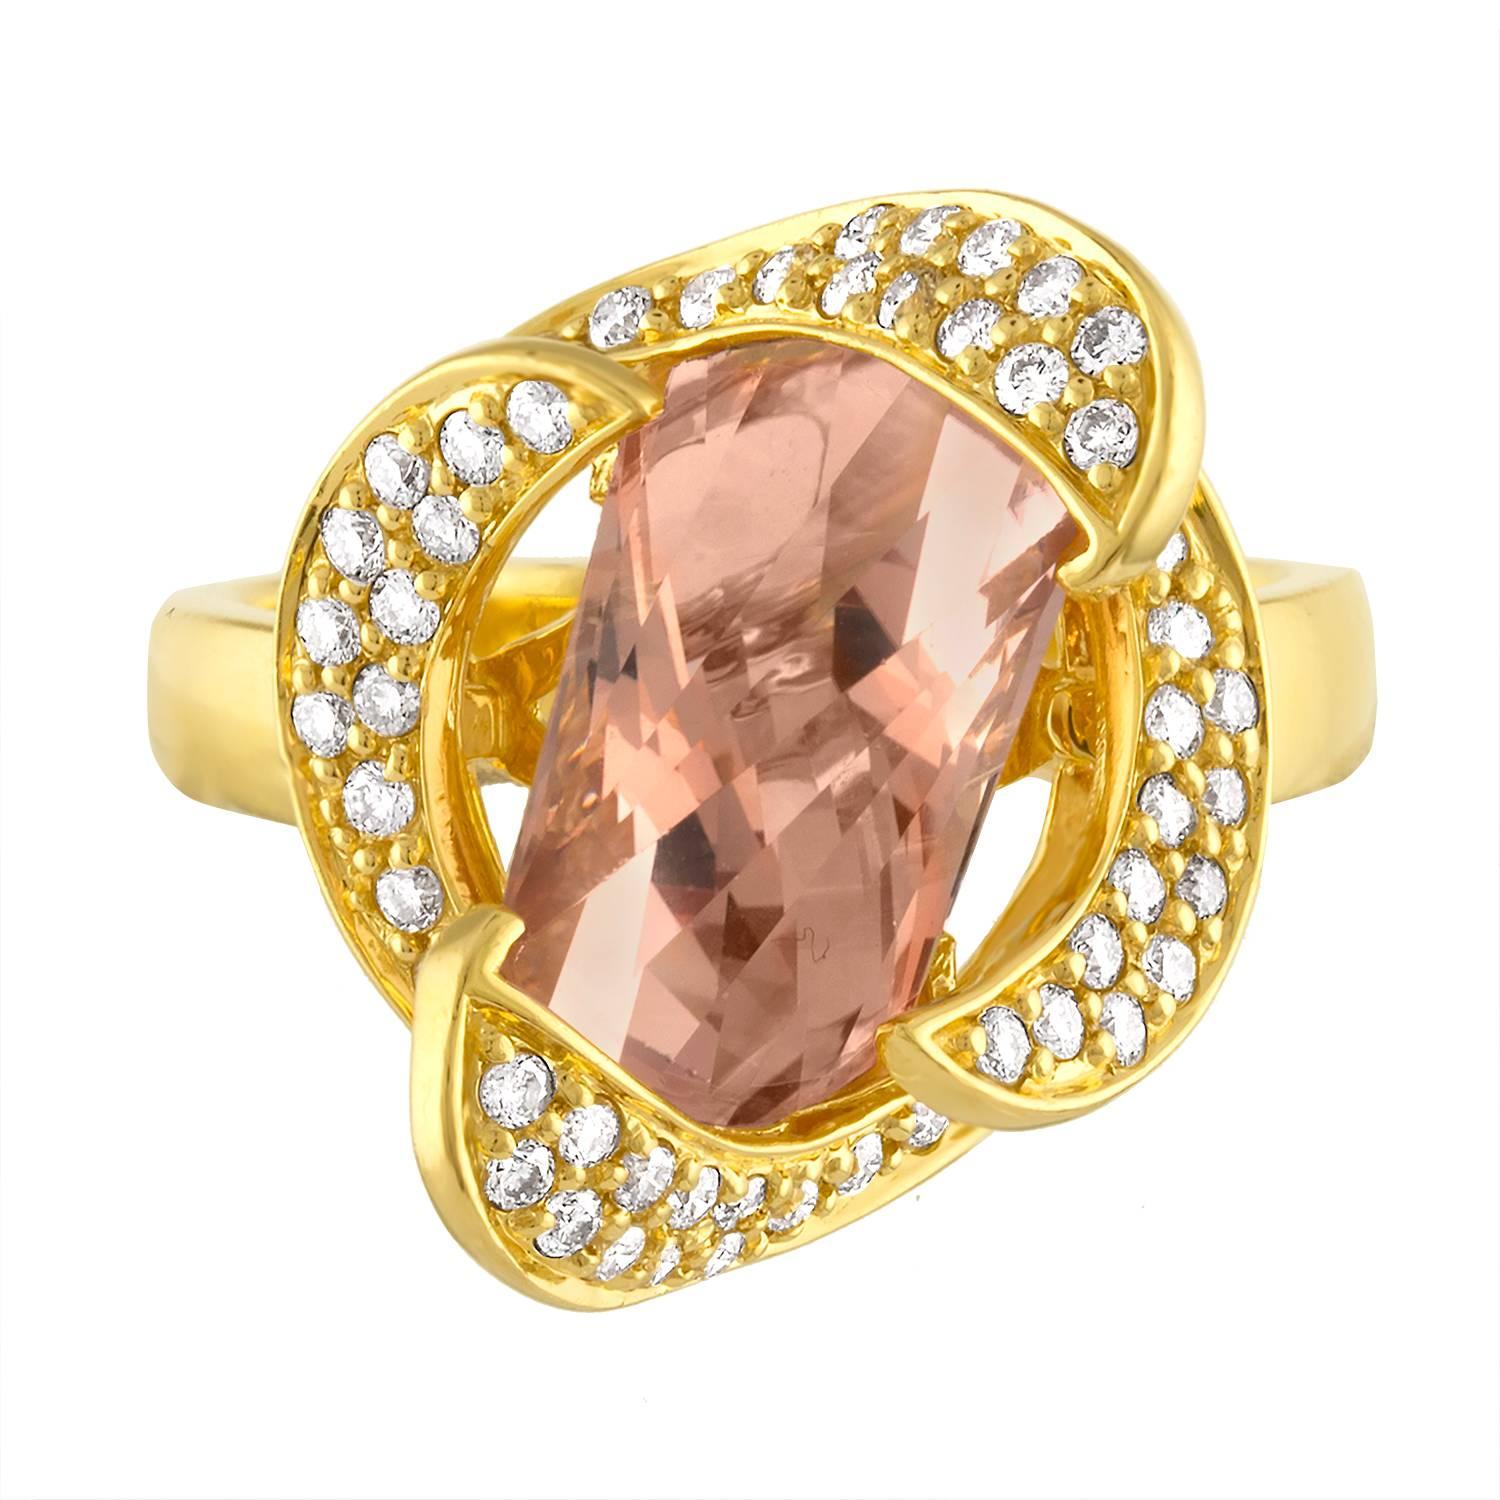 Very Unusual And Modern Design
The ring is 14K Yellow Gold
There are 0.60 Carats in Diamonds G/H SI
The Center stone is approximately 5.00 Carat Axe Cut Morganite
The ring is a size 8, sizable.
The ring weighs 8.4 grams